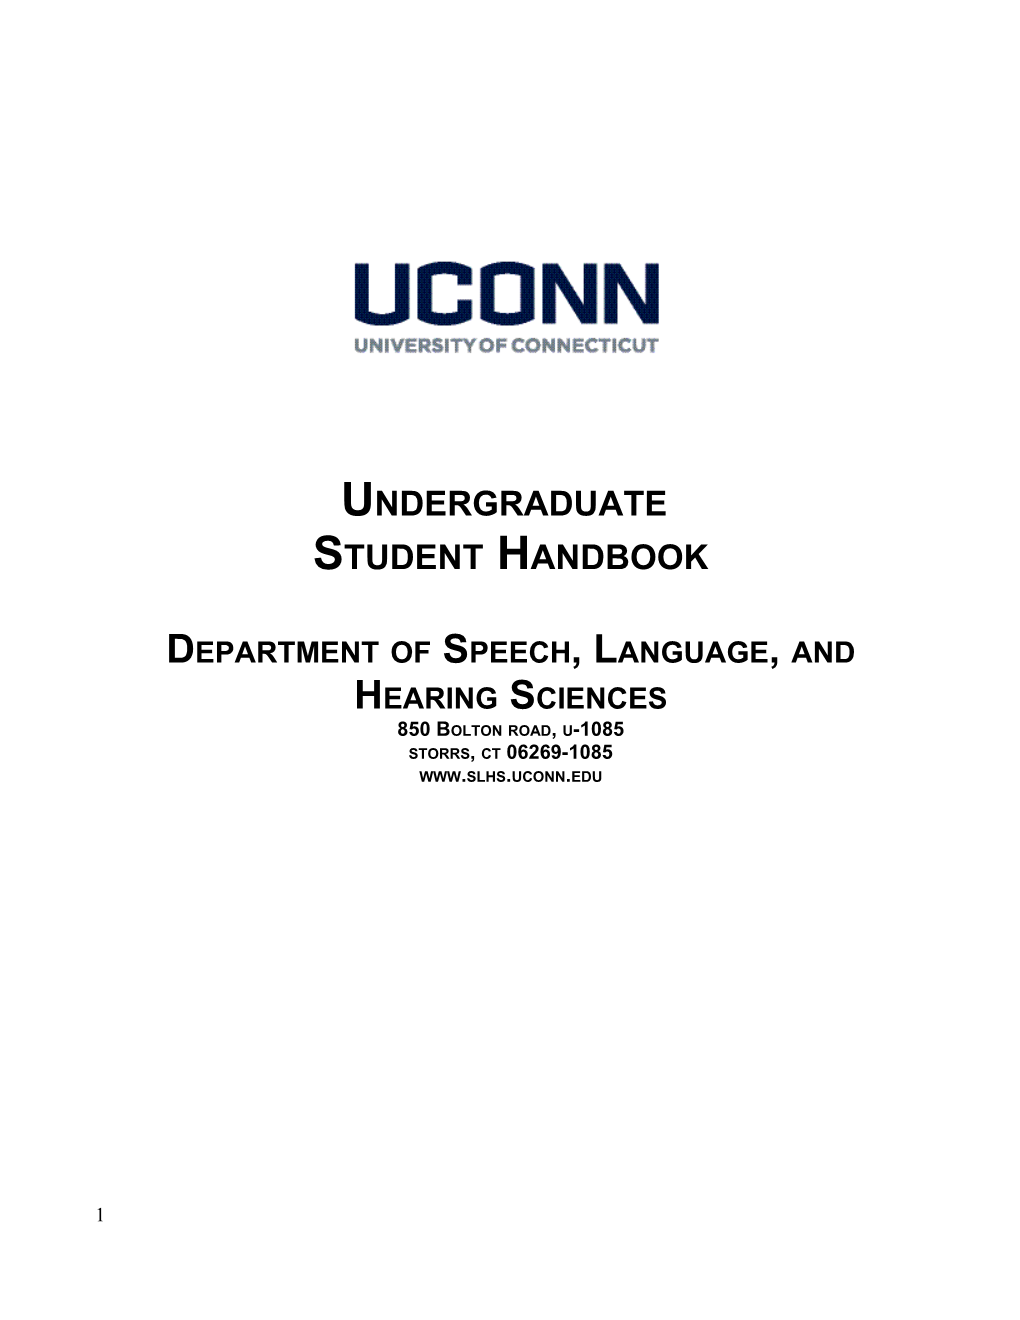 Department of Speech, Language, and Hearing Sciences